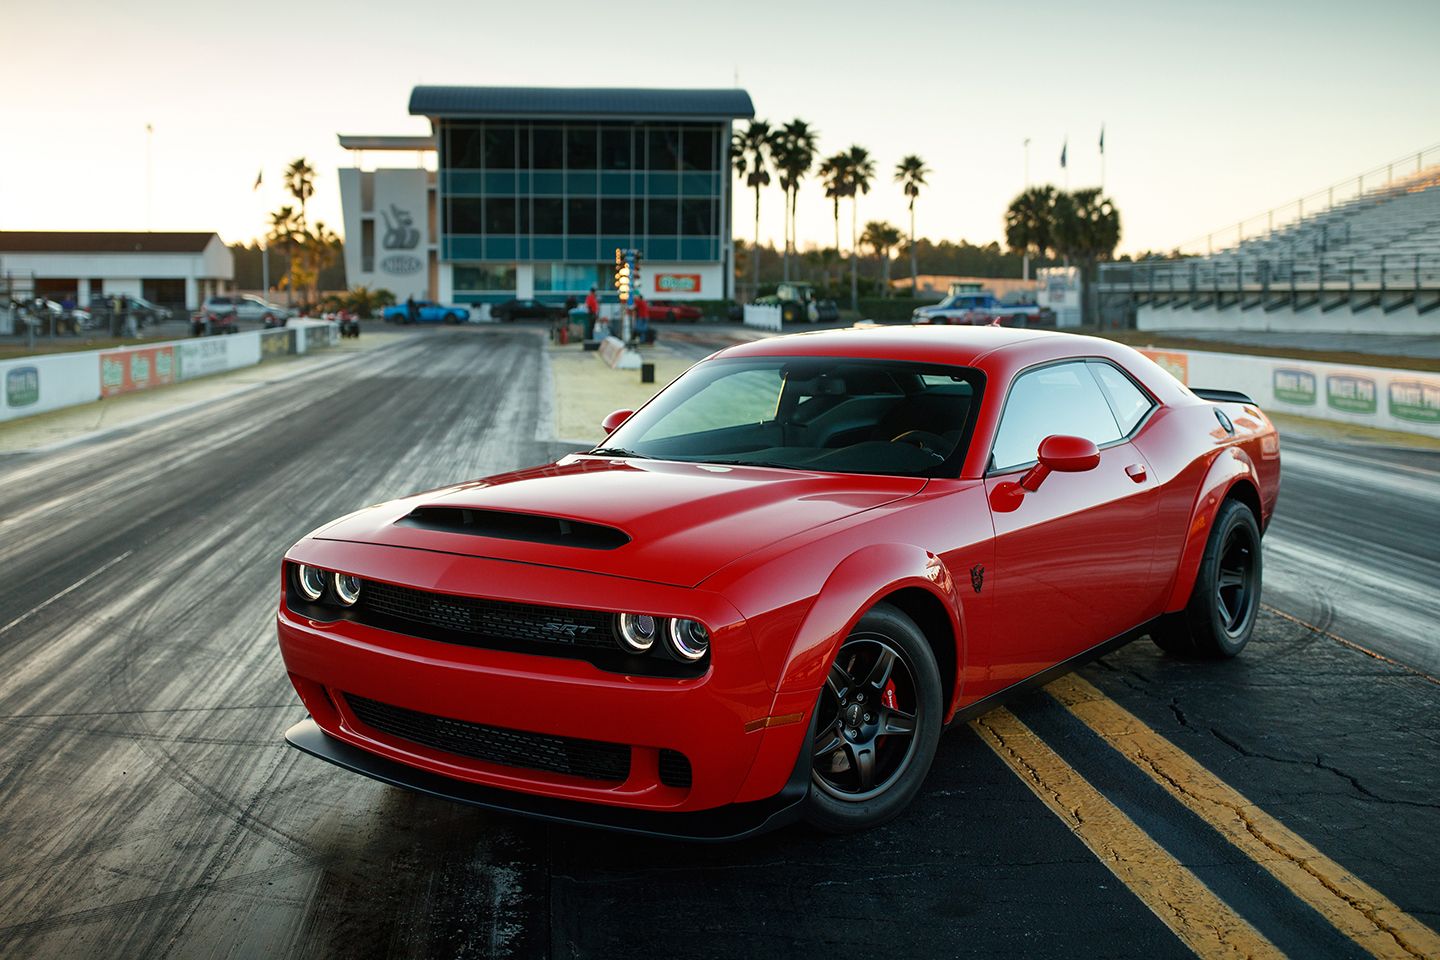 Dodge Challenger SRT Demon resurrected for final year of muscle cars